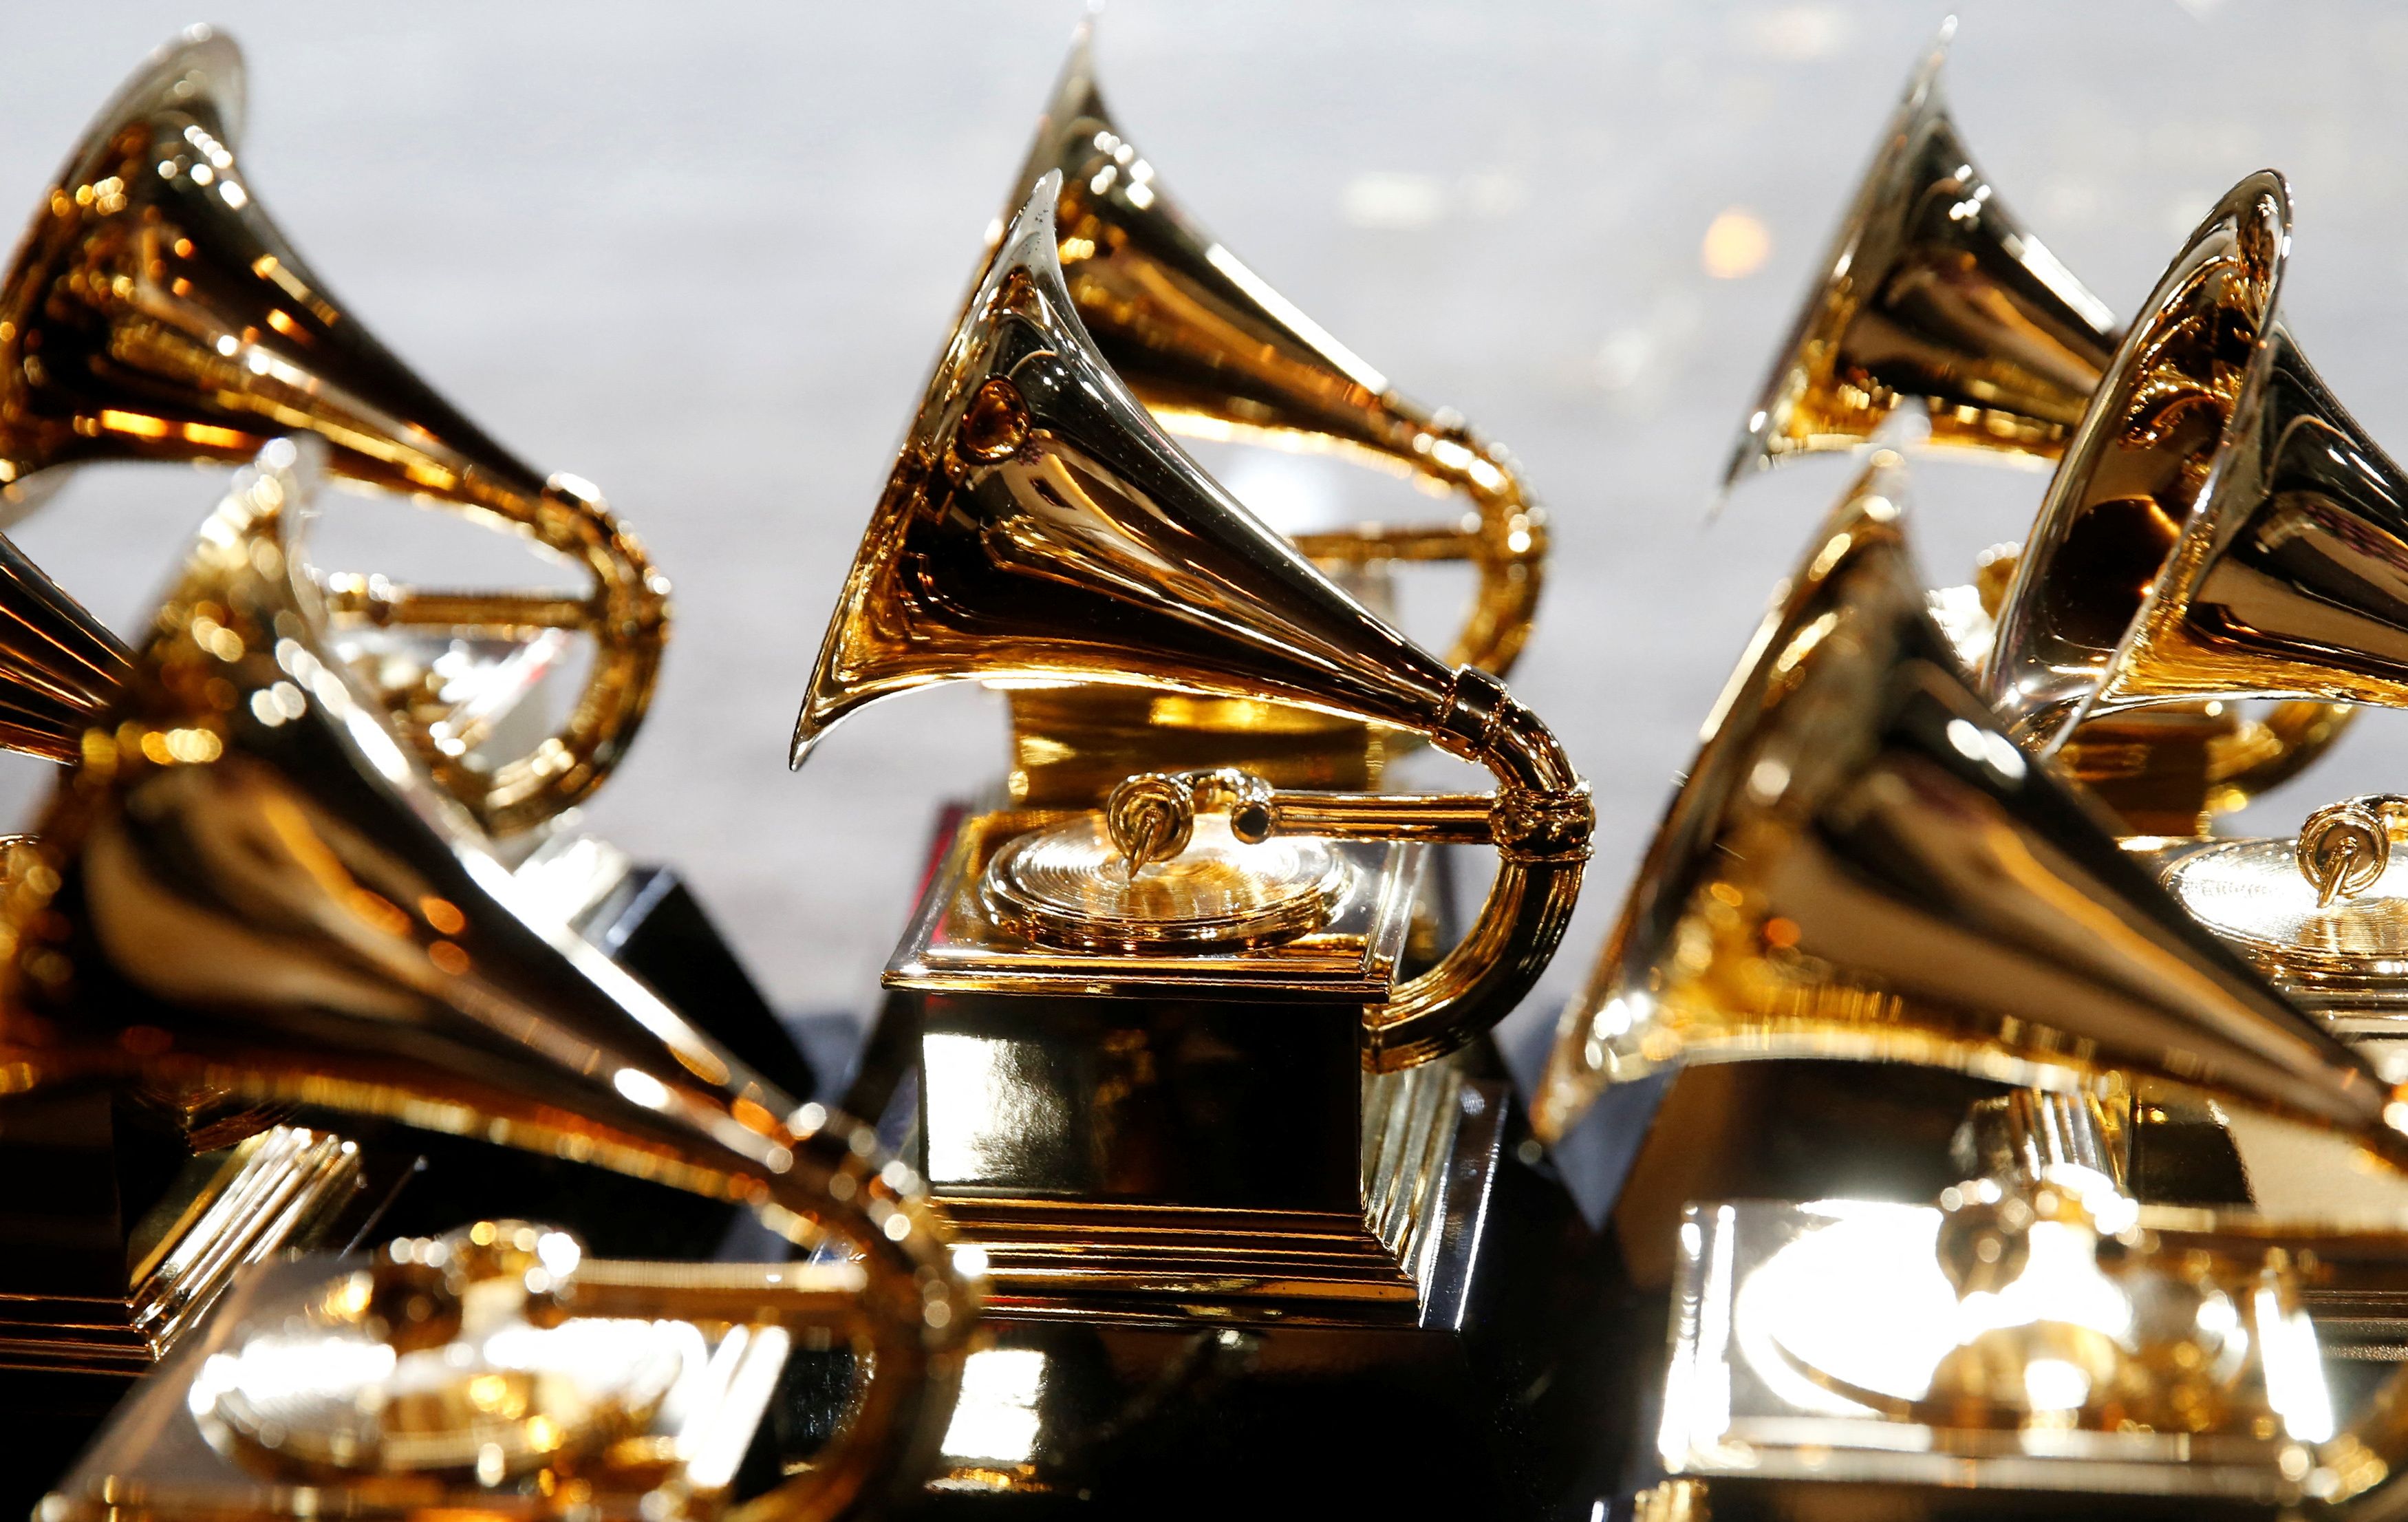 FILE PHOTO: 60th Annual Grammy Awards – Show – New York, U.S., 28/01/2018 – Grammy Awards trophies are displayed backstage during the pre-telecast. REUTERS/Carlo Allegri/File Photo